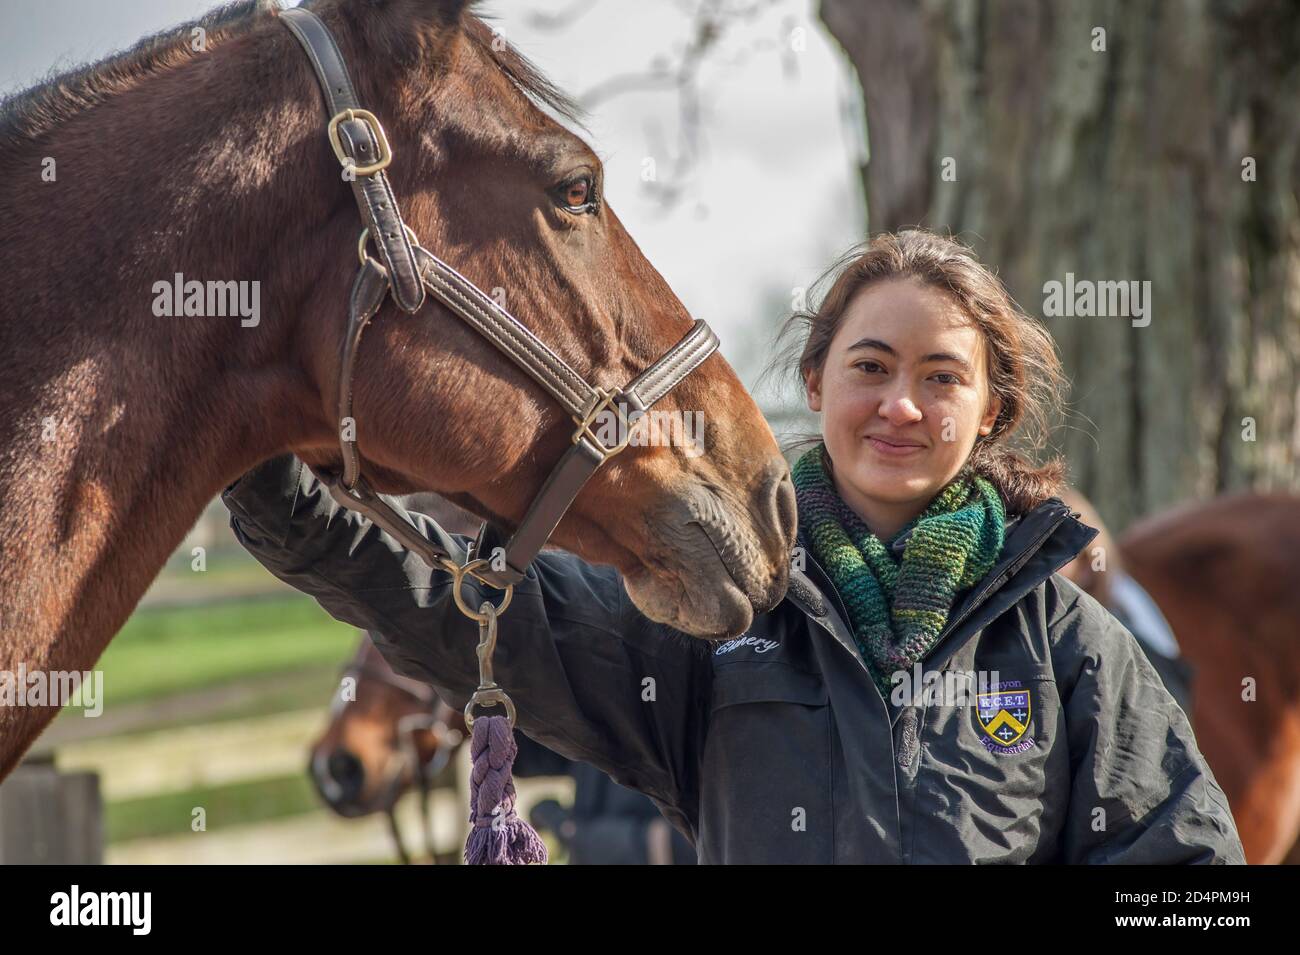 Teen girl equestrian poses with horse Stock Photo